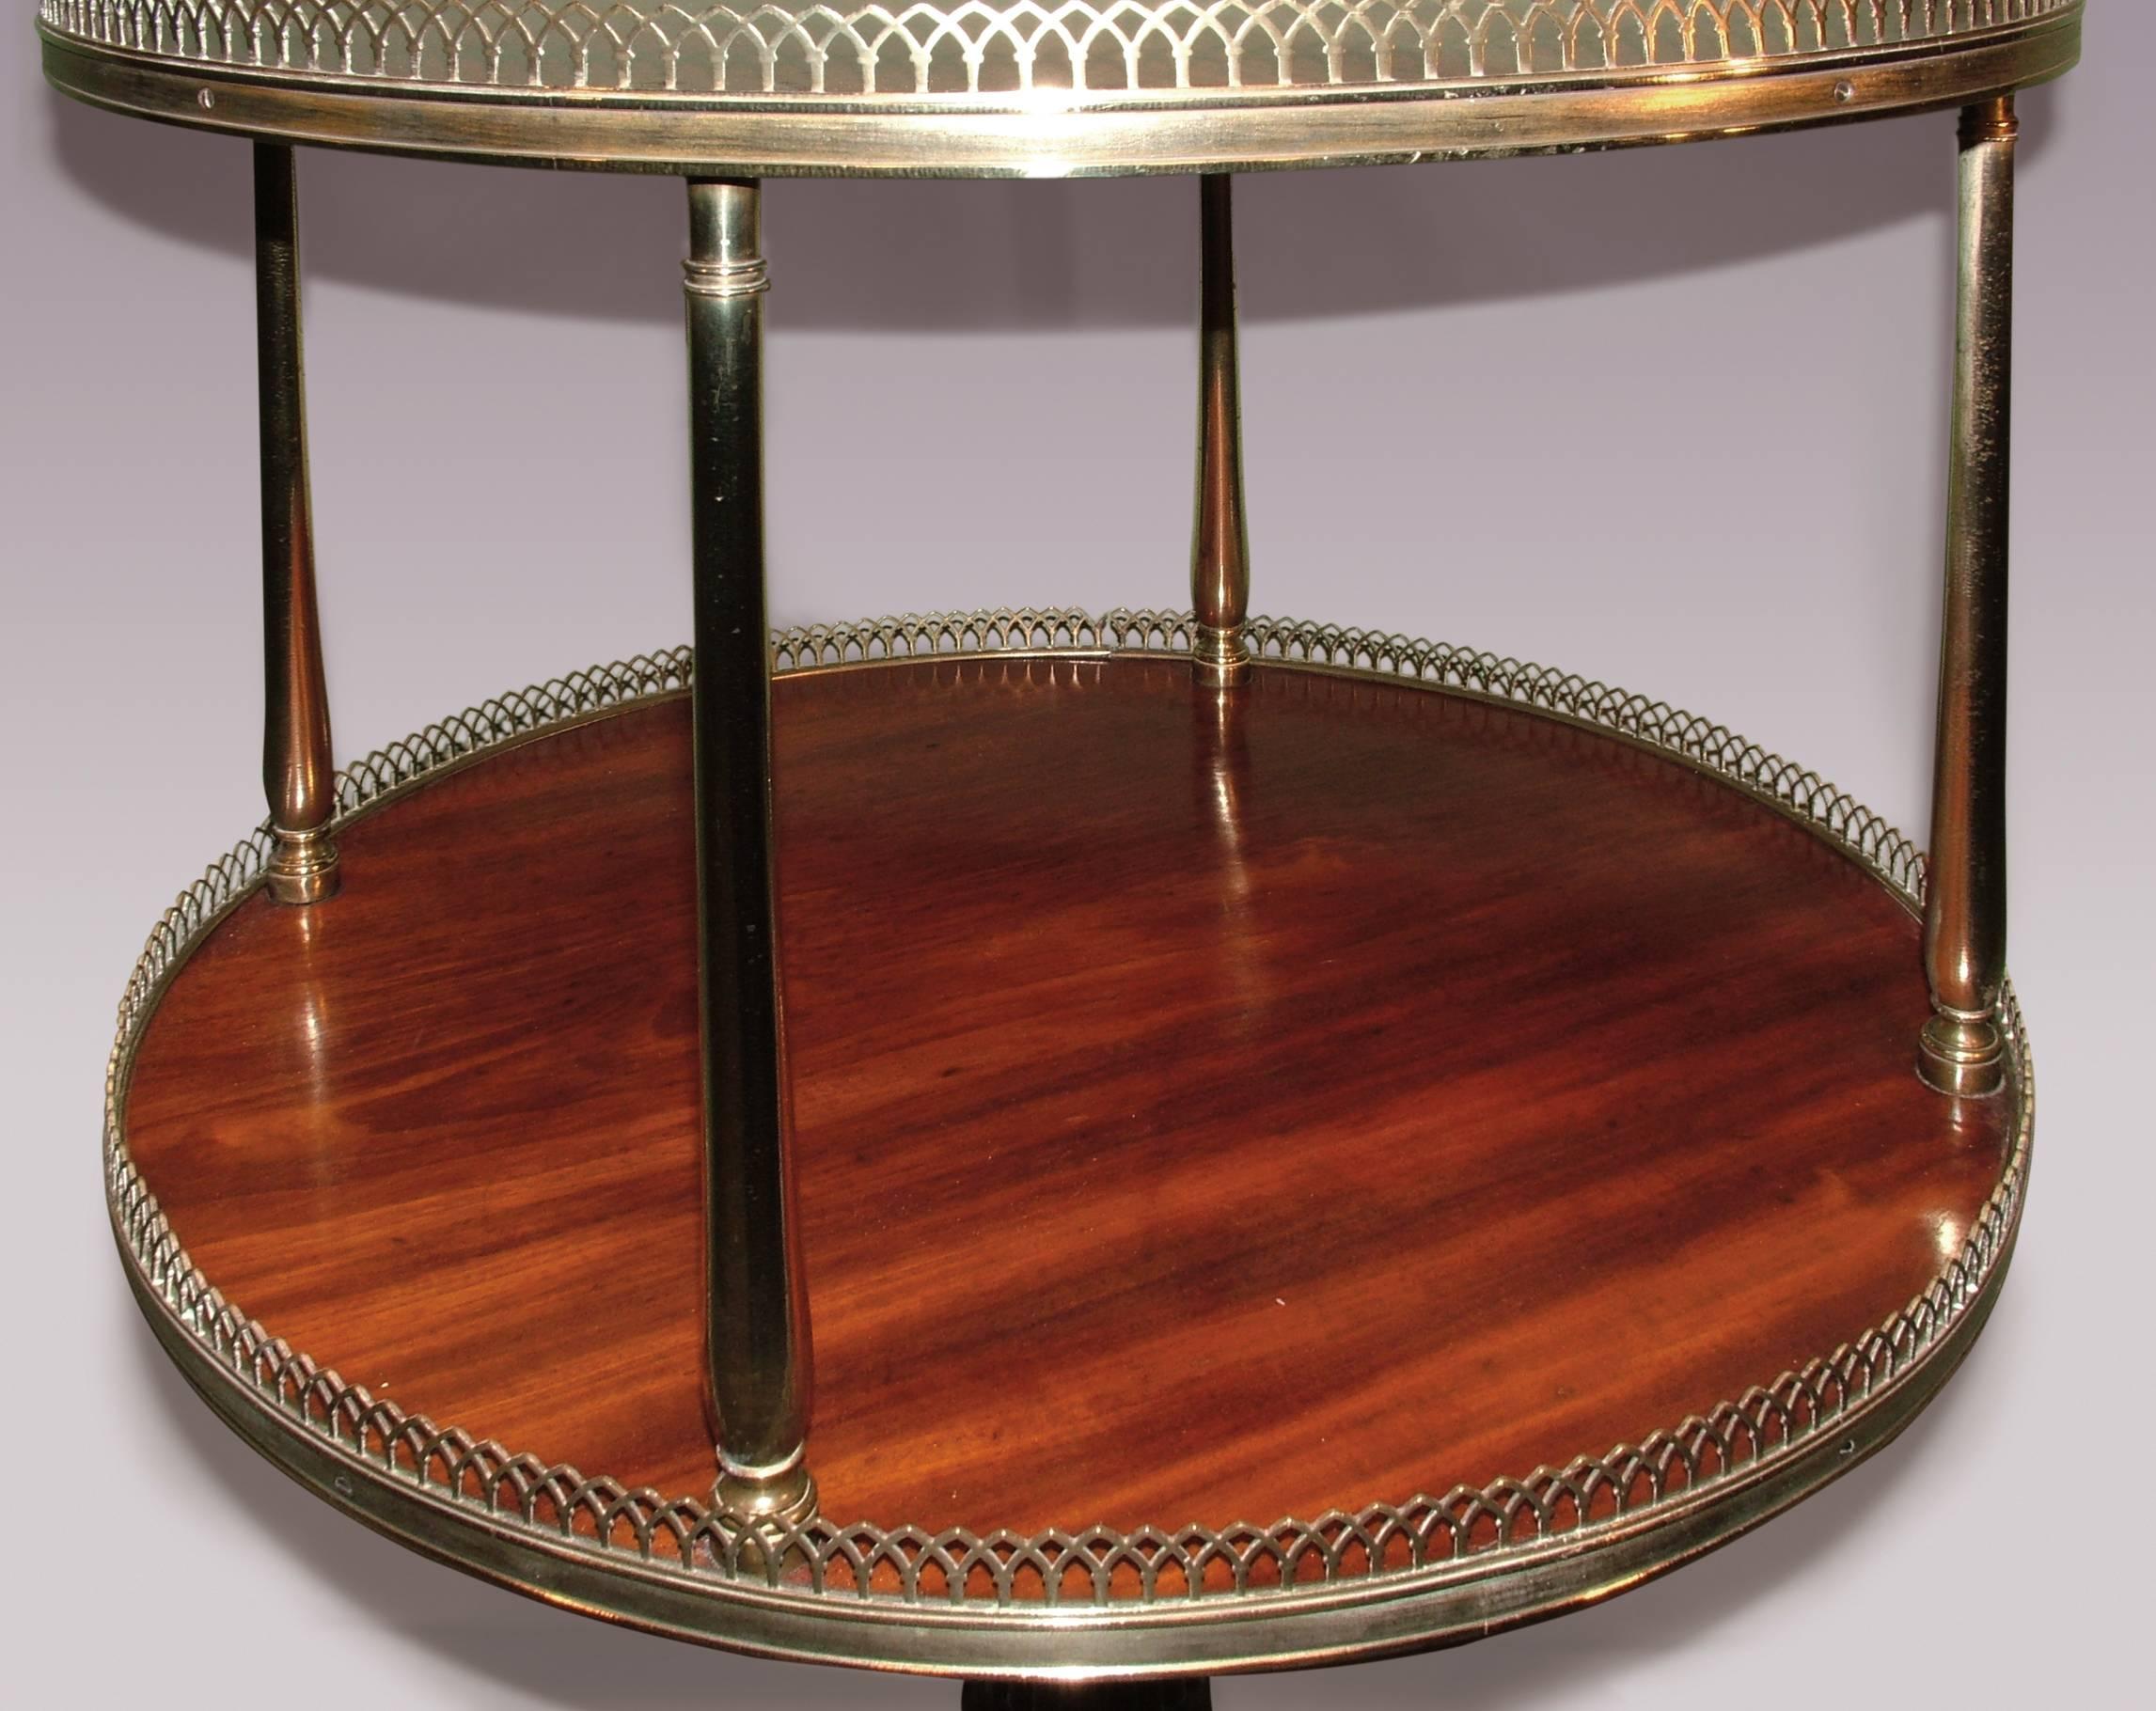 A fine early 19th century Regency period mahogany two-tier circular revolving dumb-waiter having brass gothic-arch galleries and brass baluster-turned supports, raised on reeded column and reeded three-splay legs ending on brass box castors.